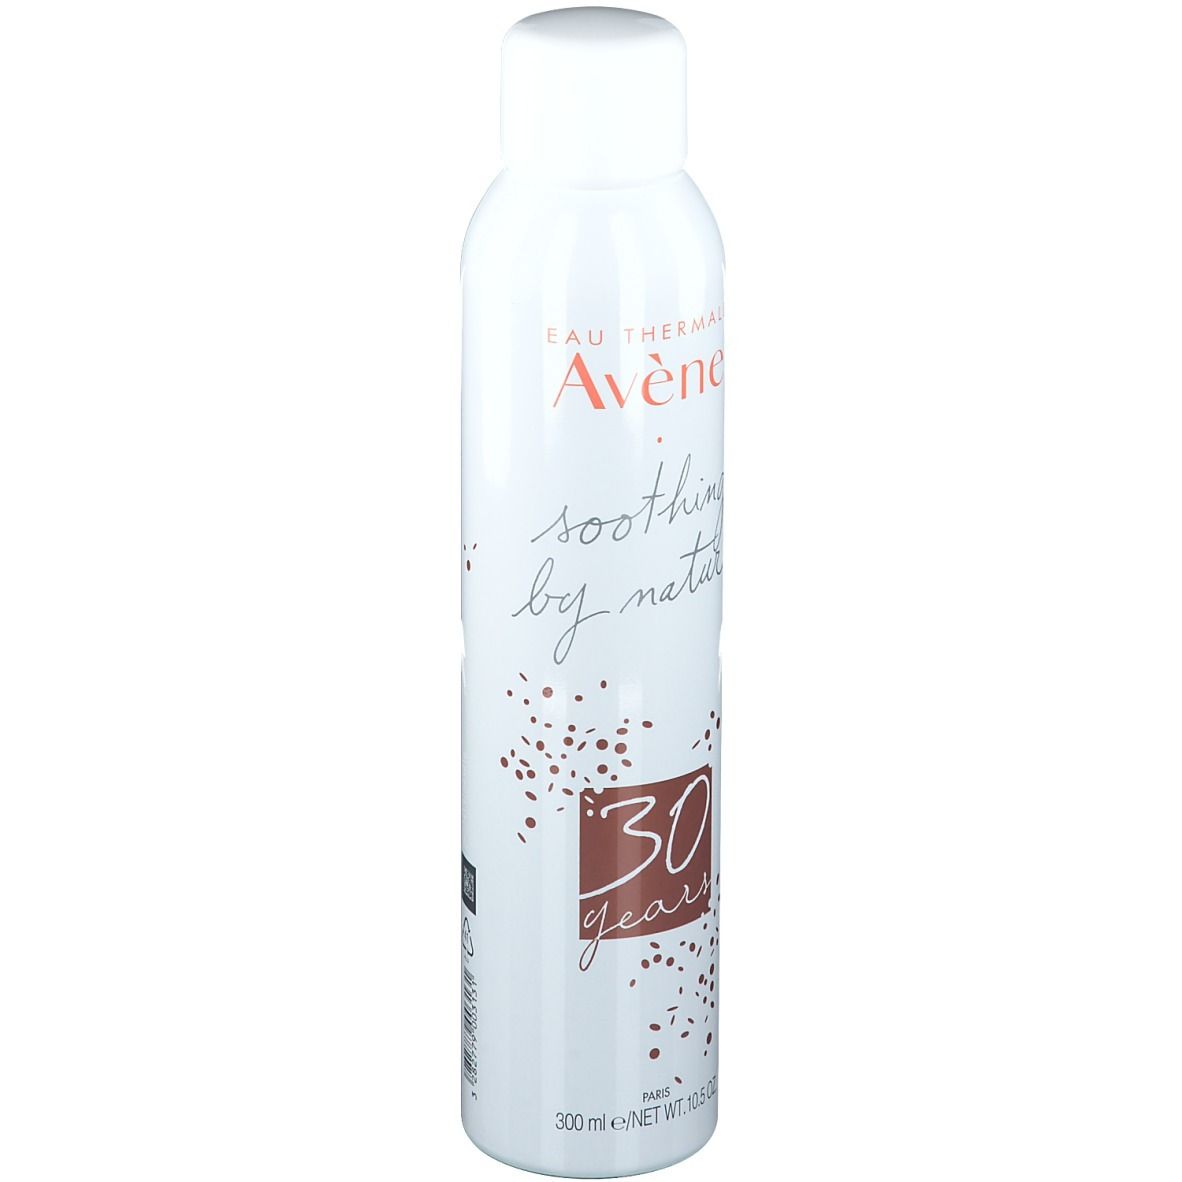 Acqua Termale Avène Spray 30 Years Limited Edition